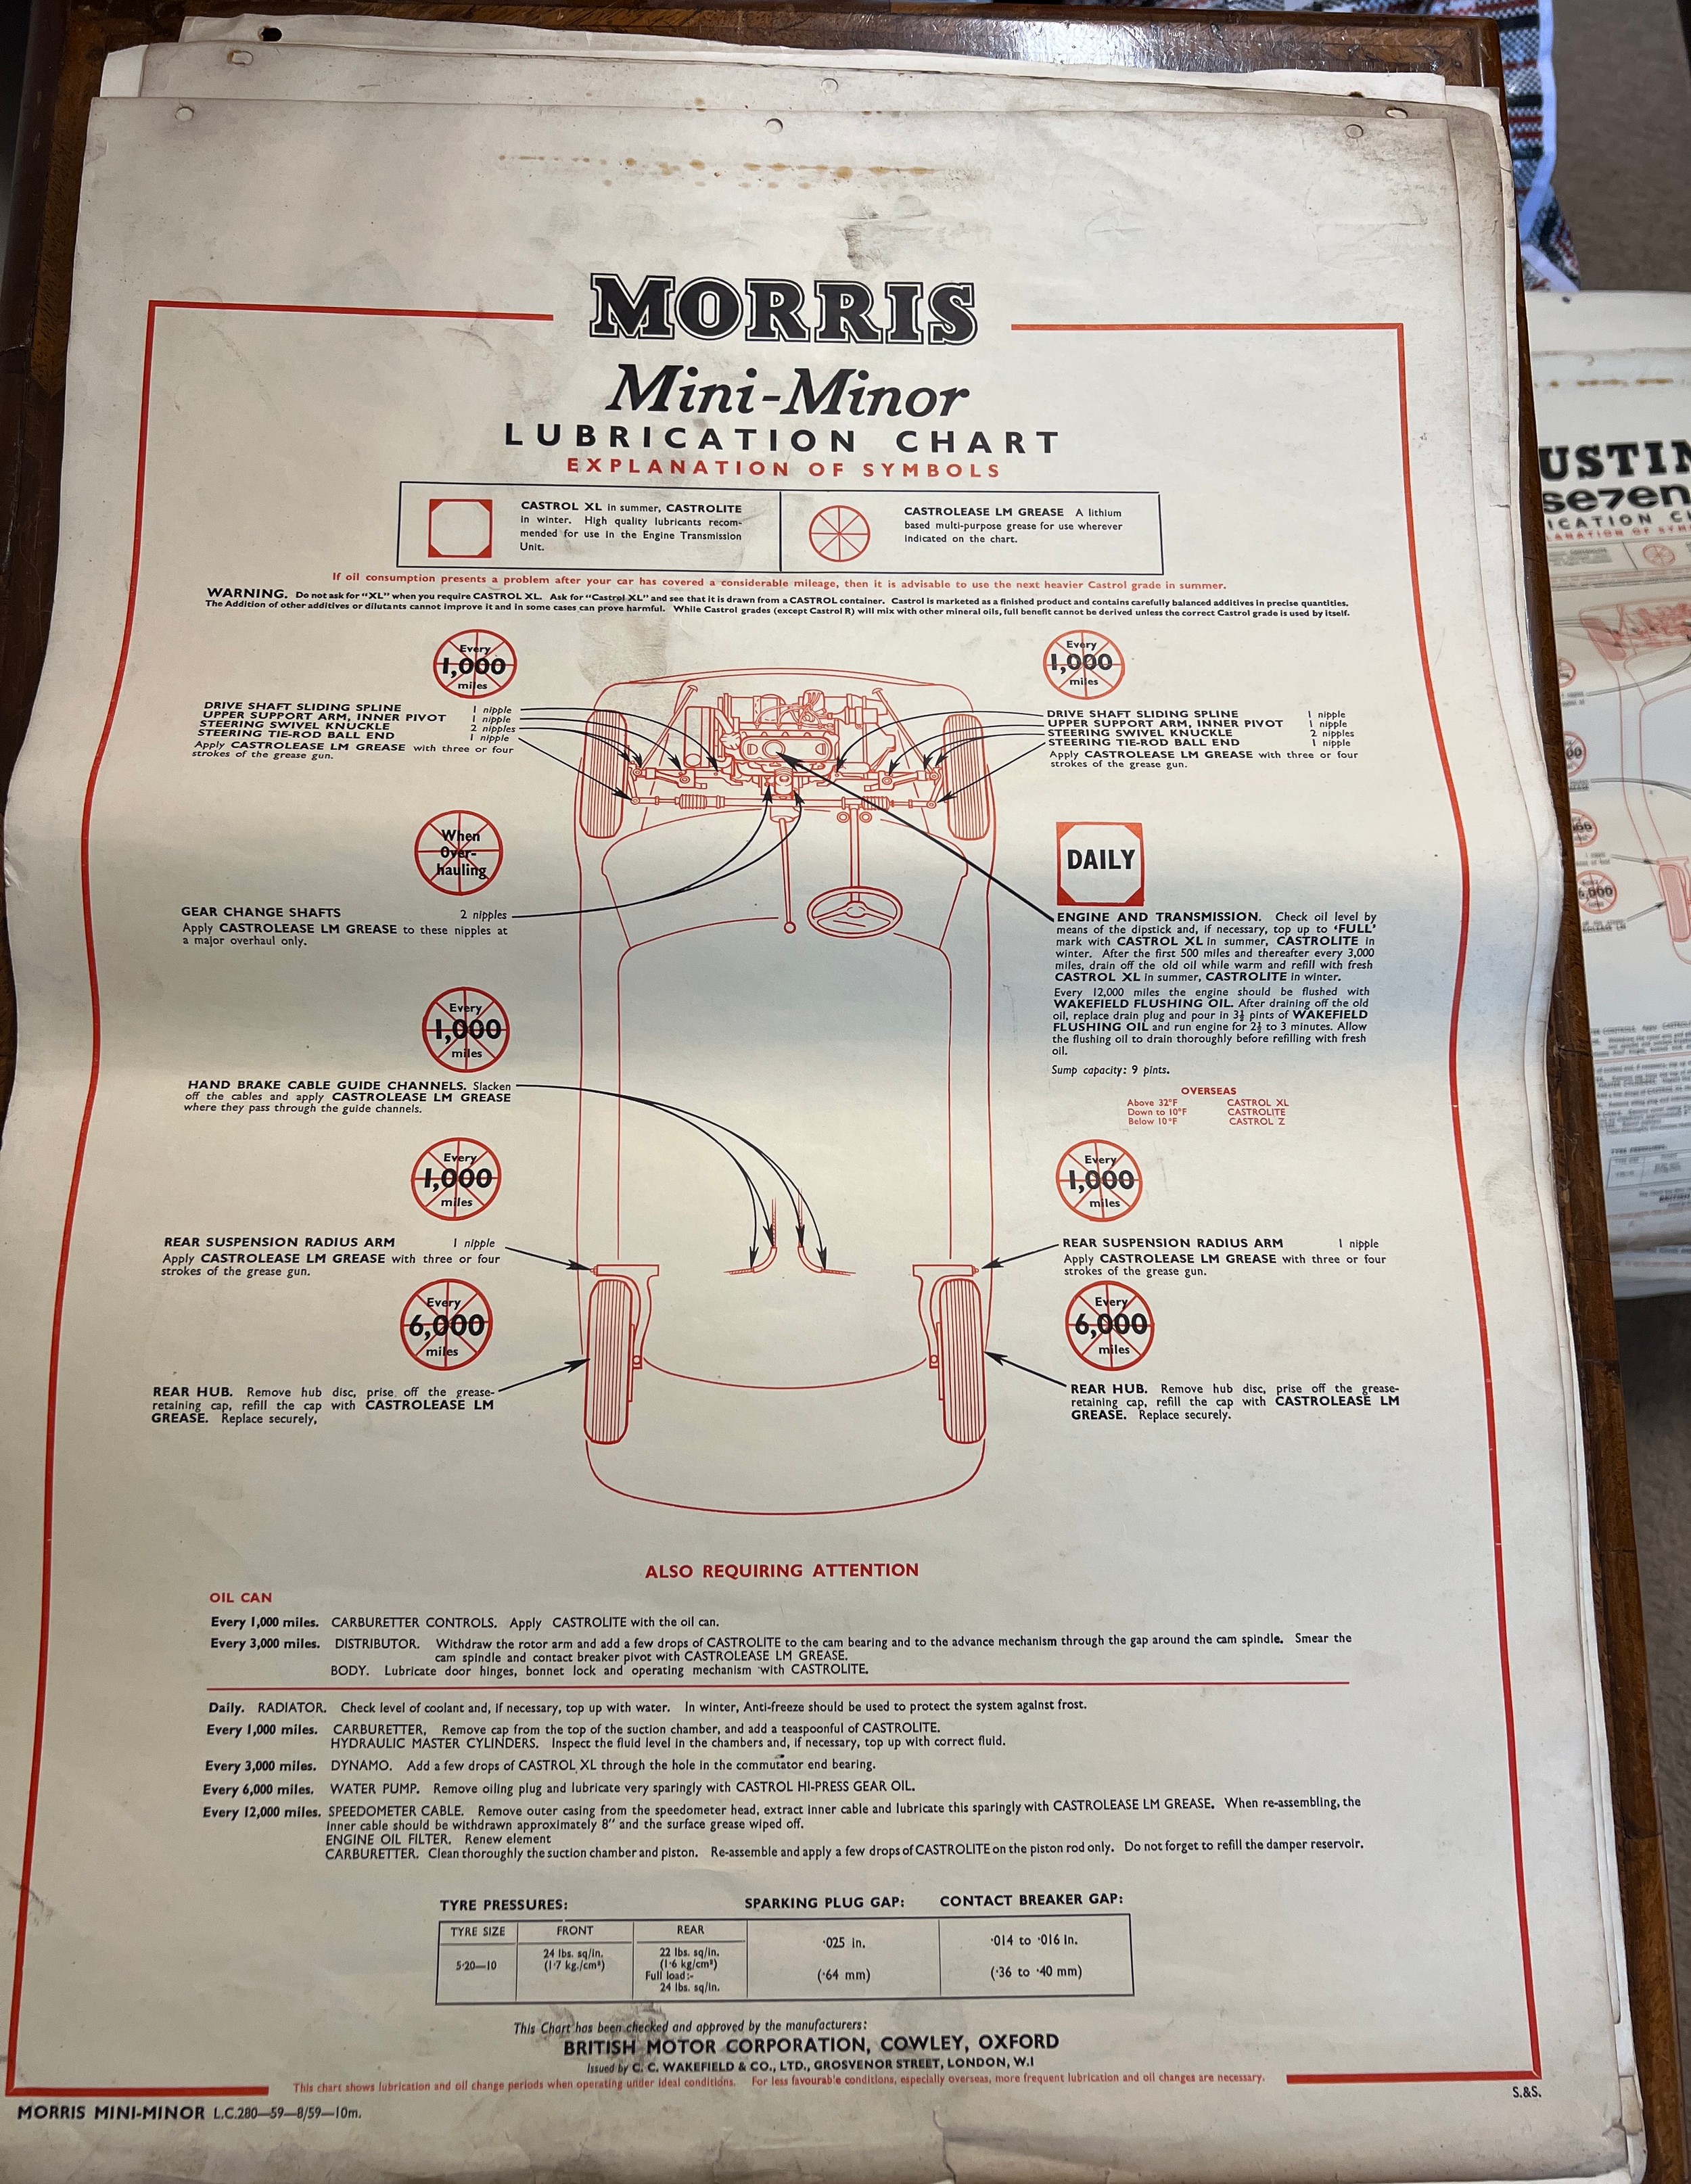 Thirty one vintage car lubrication charts to include Wolseley, Morris, MG 1100, Morris 1100, - Image 20 of 31